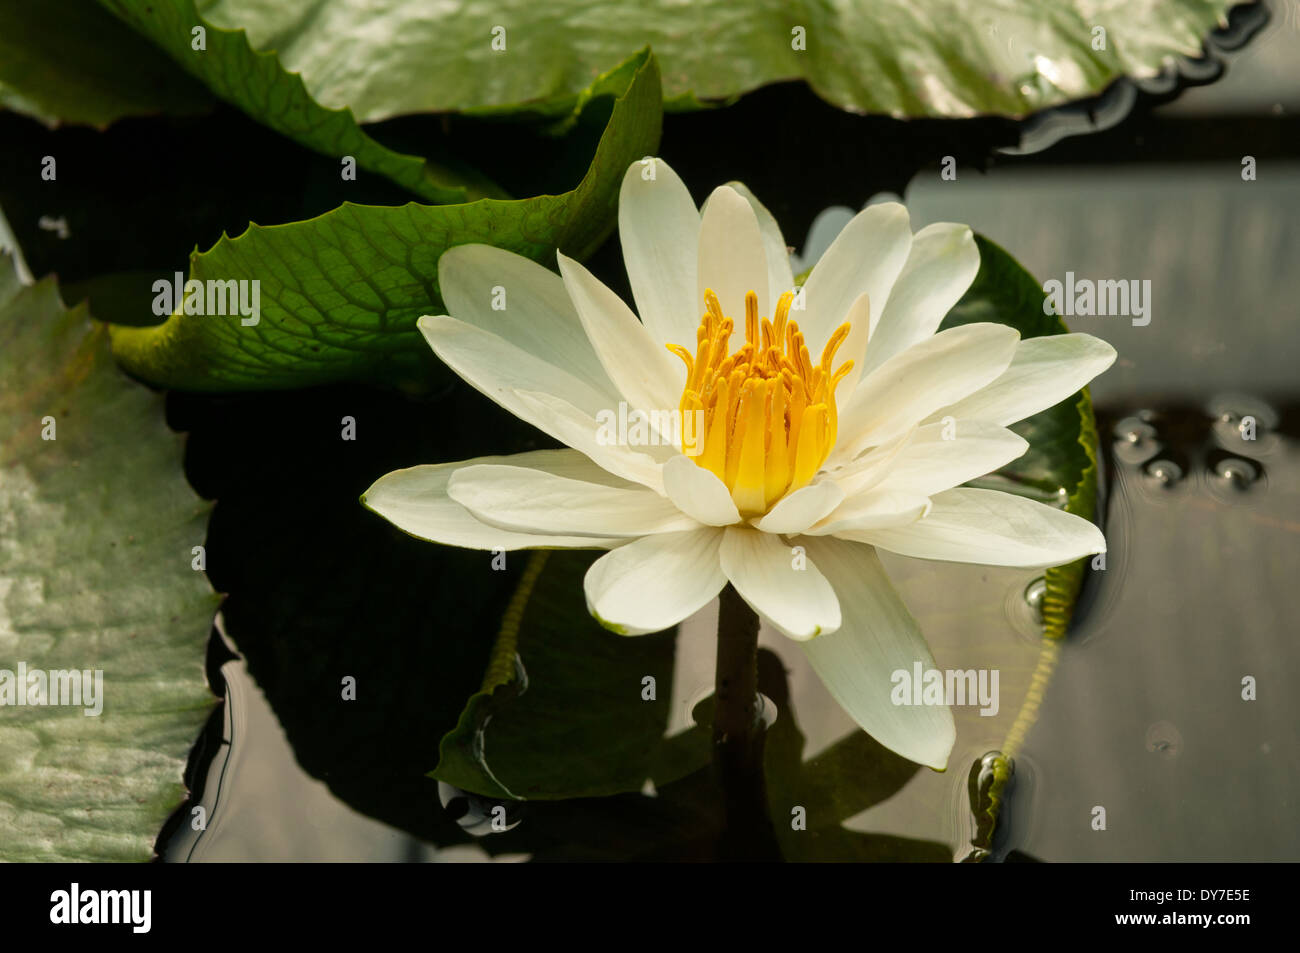 Nymphaea alba, White Tropical Water Lily Stock Photo